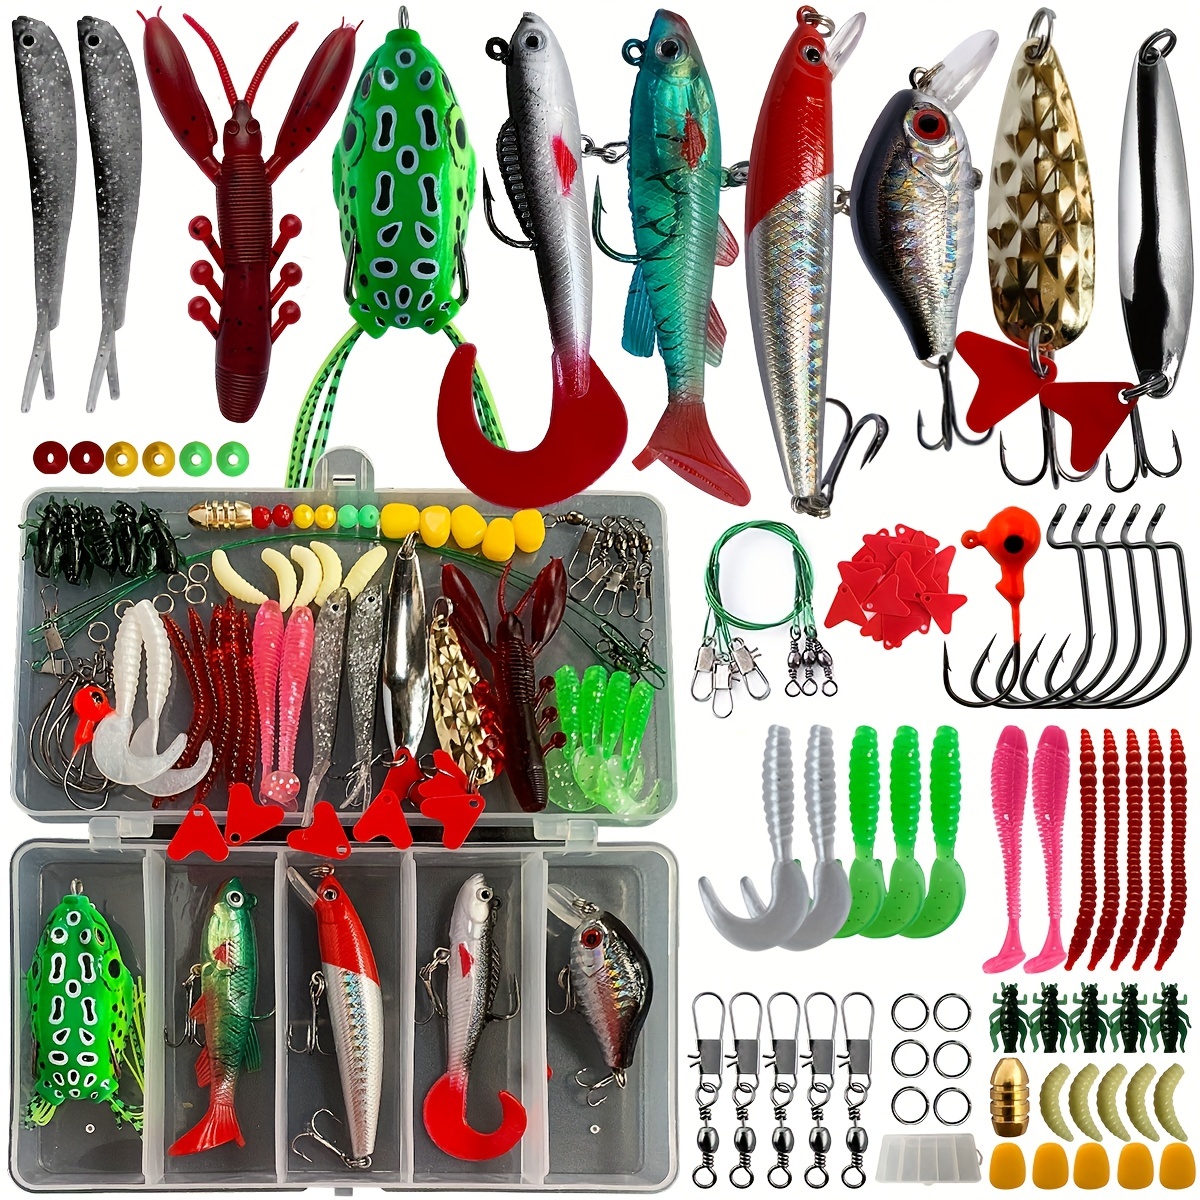 GOTOUR Fishing Lures for Freshwater and Saltwater, Pre-Rigged Soft Plastic  Swimbait Paddle Tail Shad Lure, Weedless Bass Lures, Pike Trout Walleye  Striped Bass Fishing Lure Fishing Gifts for Men, Soft Plastic Lures 